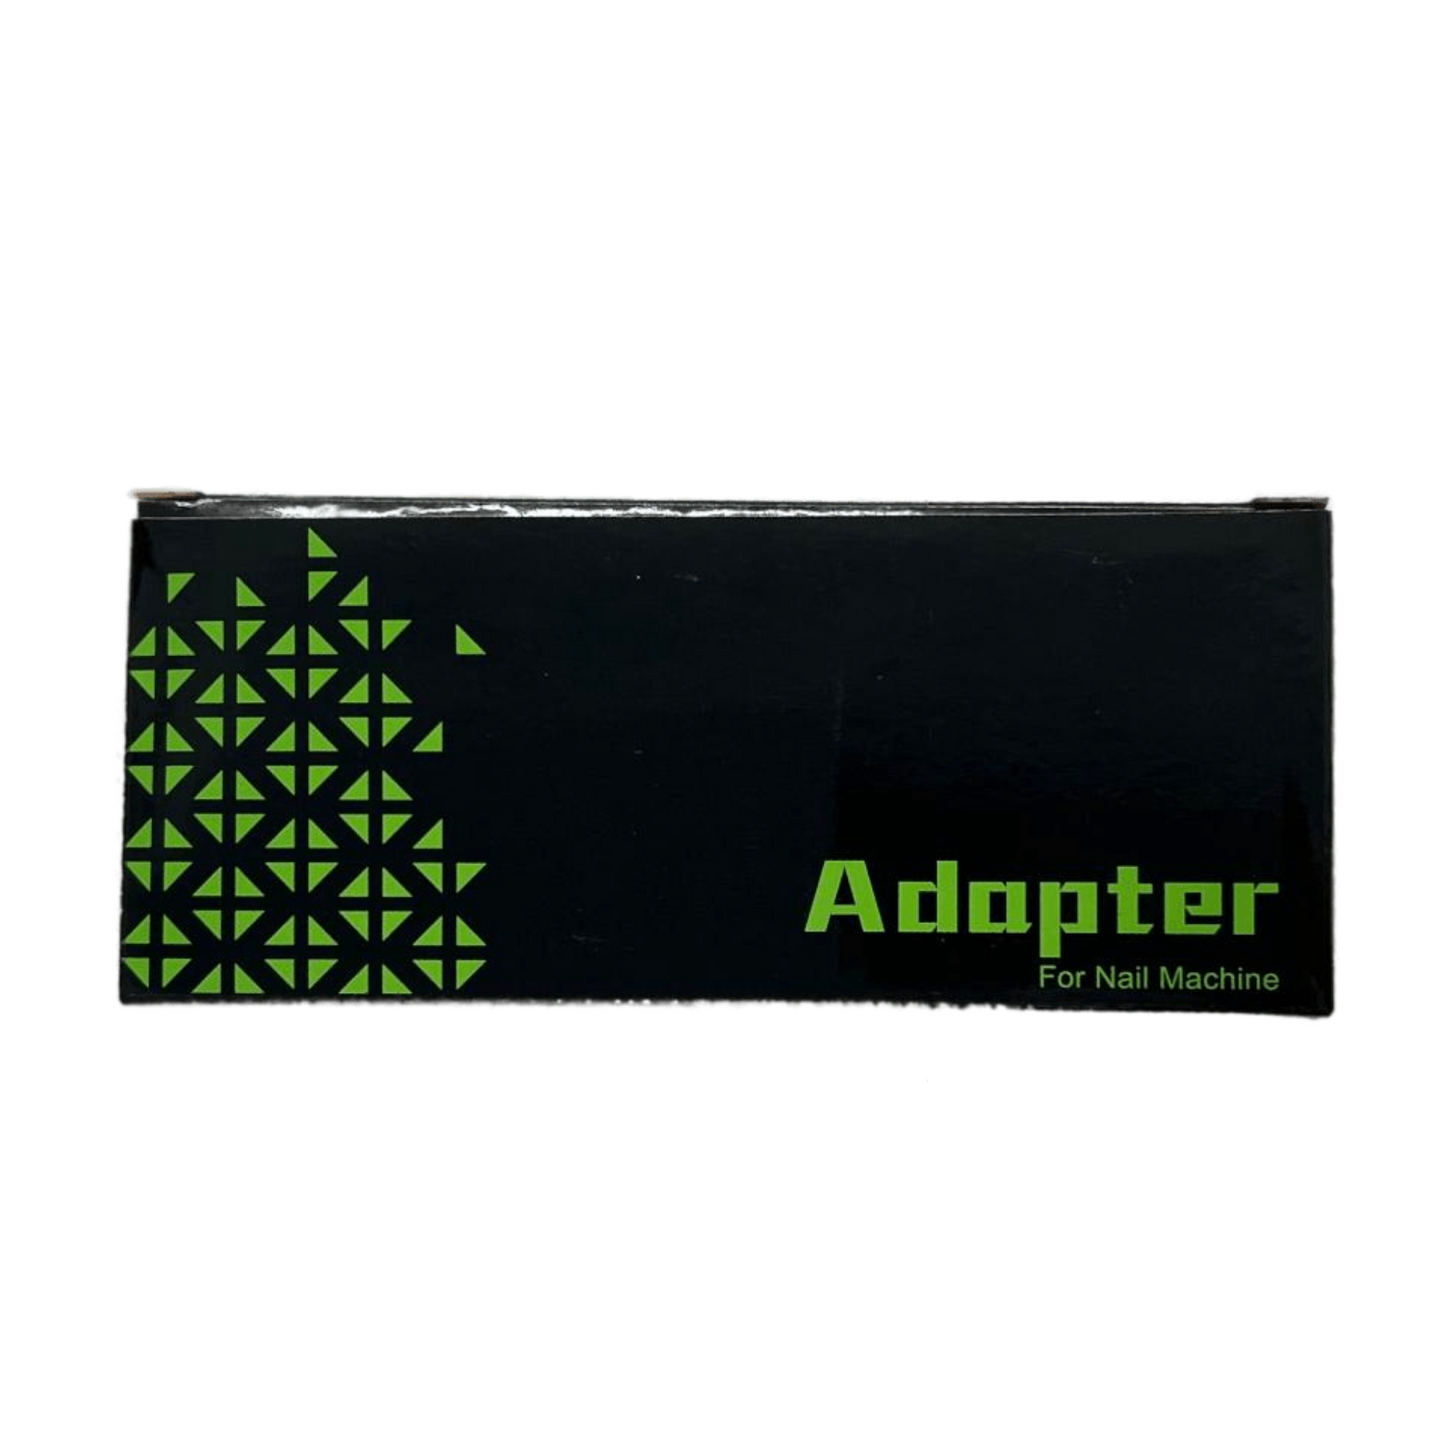 Adapter for Nail Machine